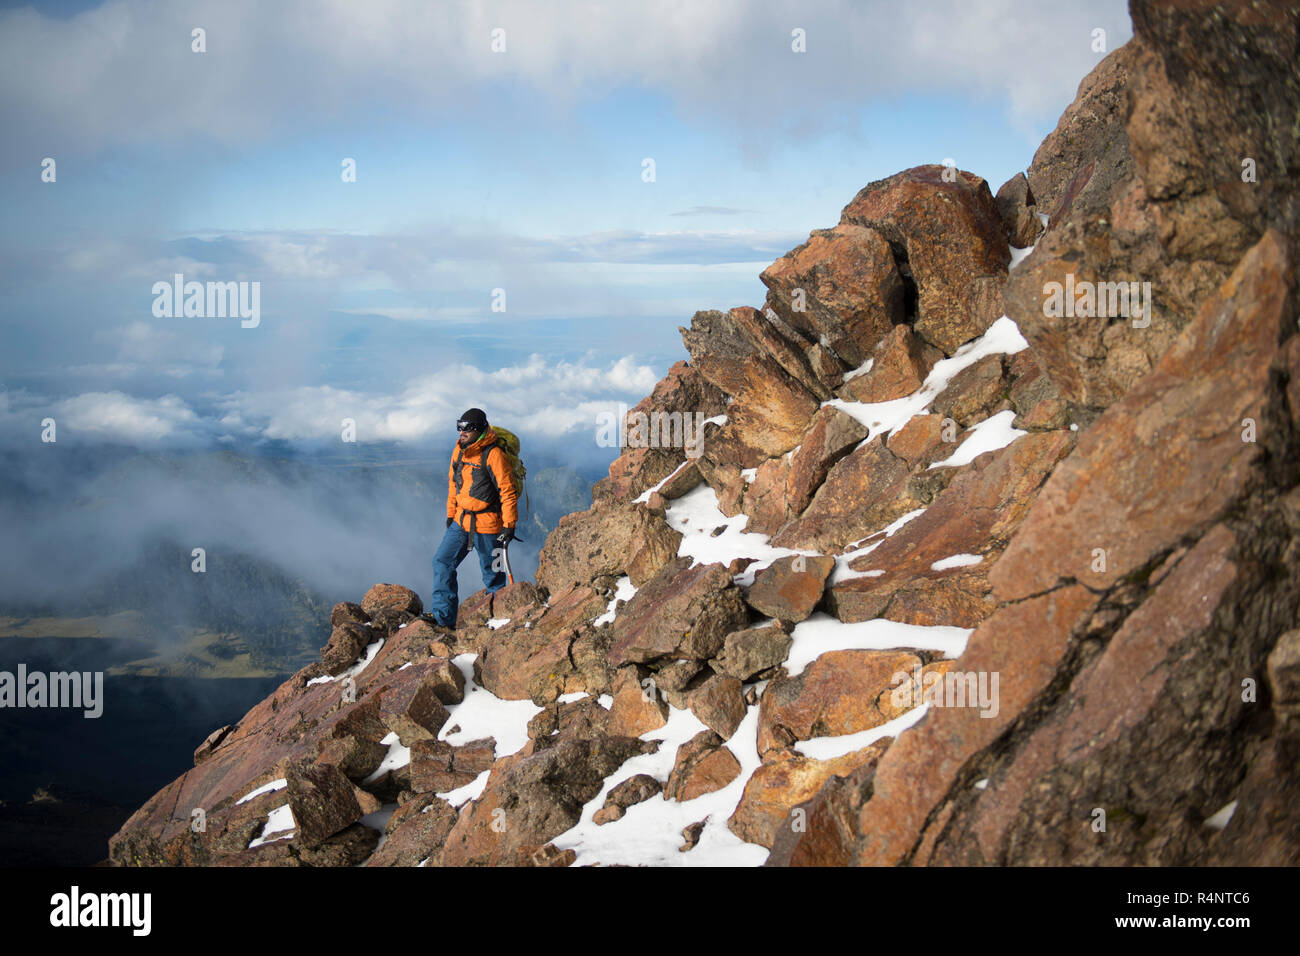 One man hiking trough a rocky section on his ascent to the Iztaccihuatl volcano at theÂ Izta-Popo Zoquiapan National ParkÂ in Puebla, Mexico Stock Photo